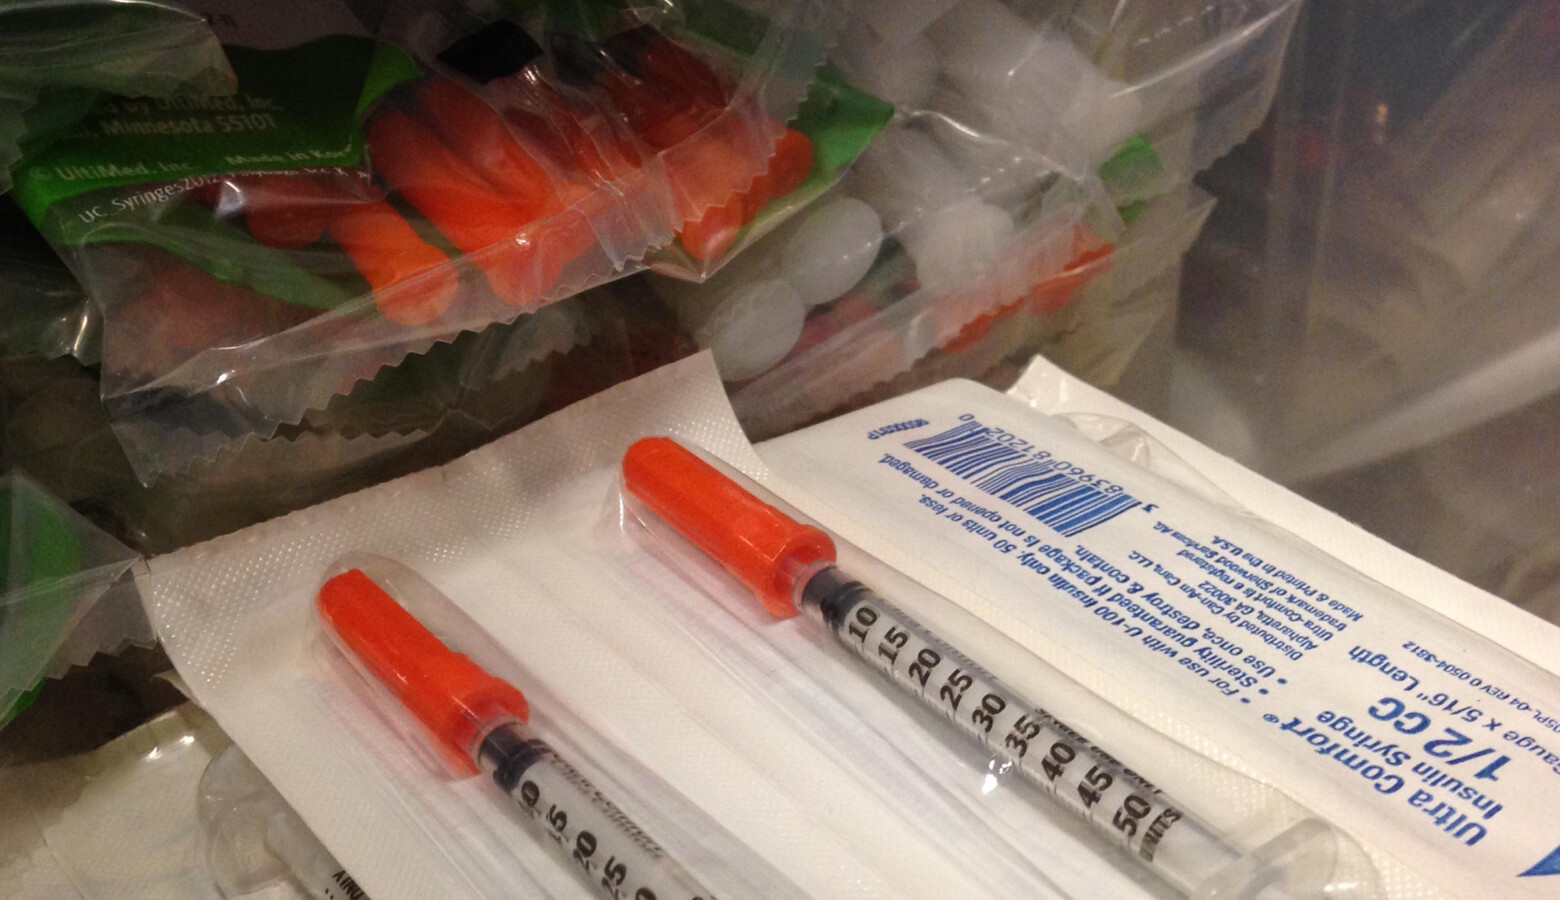 Lawmakers pushed back the death sentence for Indiana’s syringe exchange programs by one year under legislation approved by a Senate committee. (FILE PHOTO: Jake Harper/Side Effects)